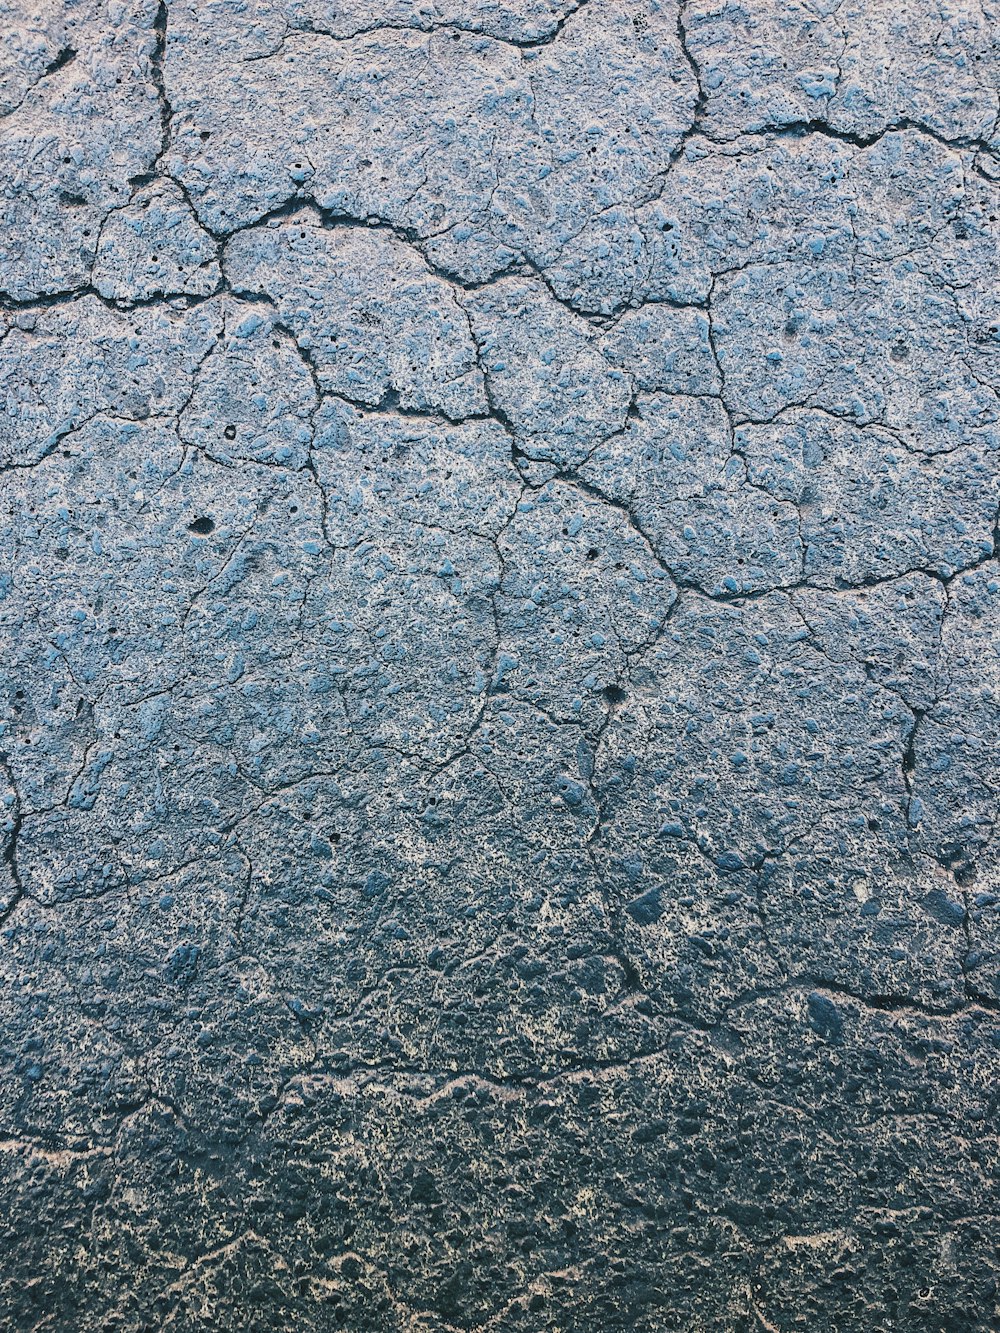 a bird is standing on the cracked surface of the ground